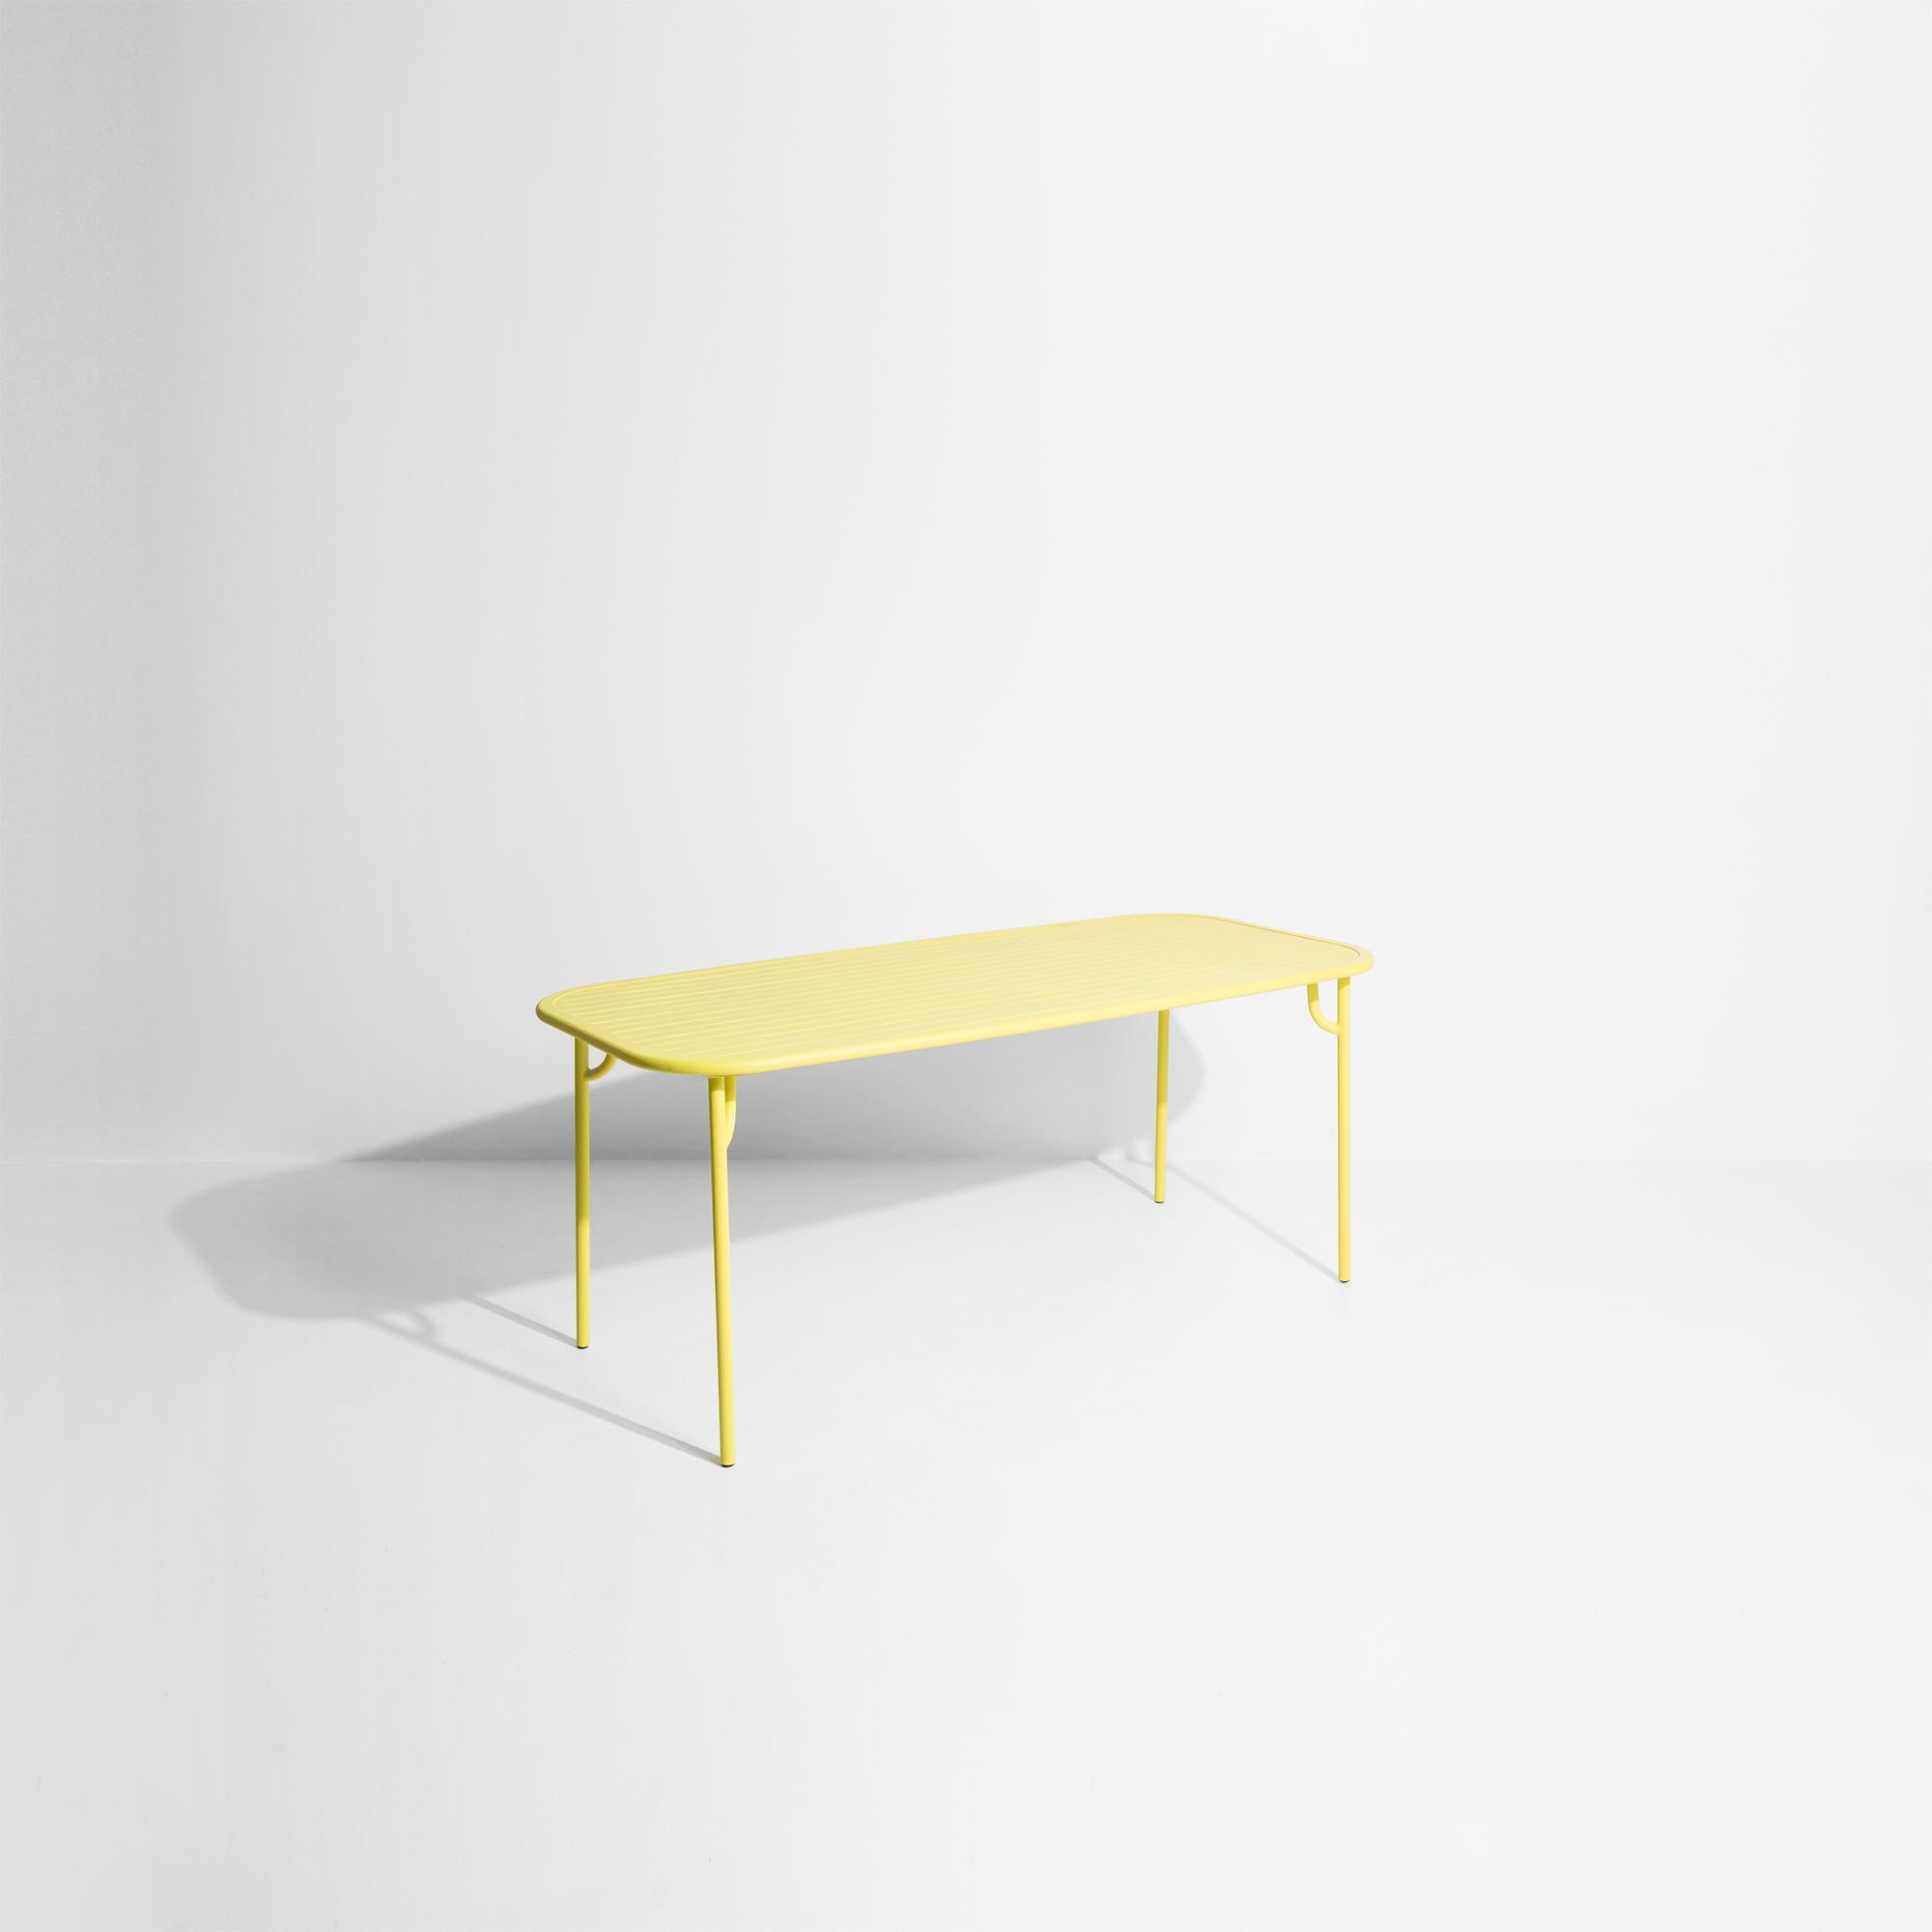 Petite Friture Week-End Medium Plain Rectangular Dining Table in Yellow, 2017 In New Condition For Sale In Brooklyn, NY